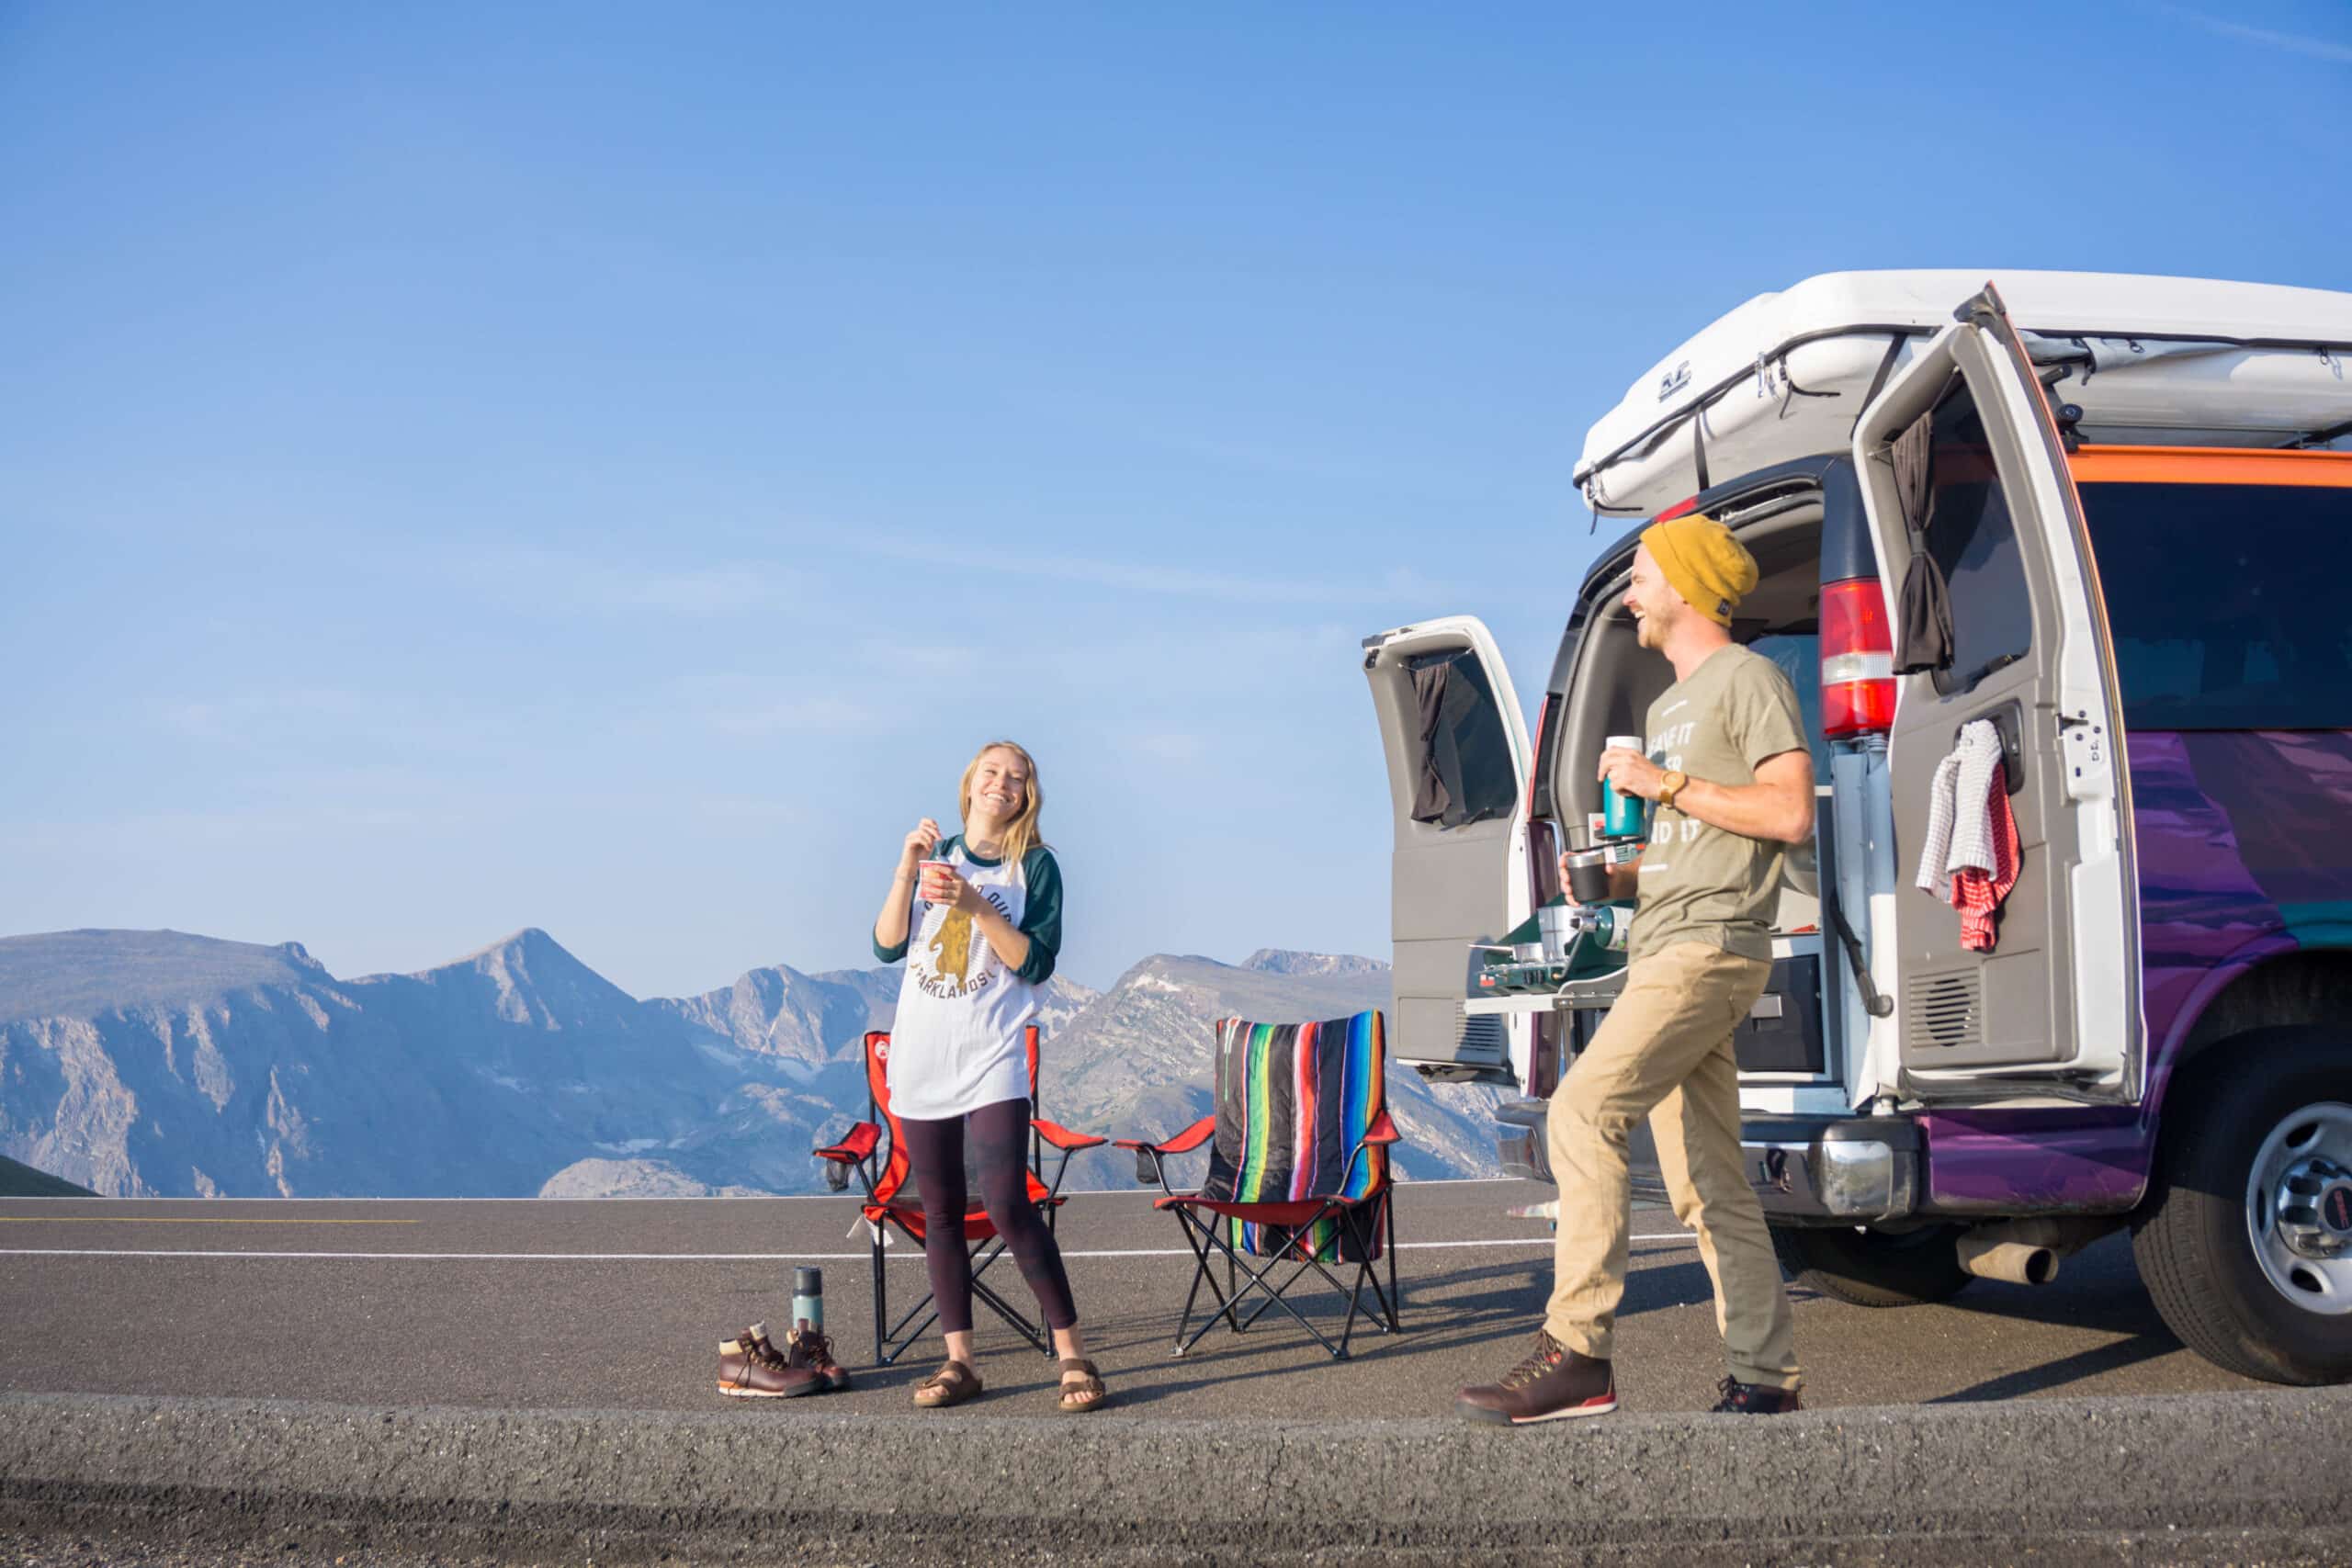 A camper van is the ideal way to explore the National Parks in Colorado, you won't waste any time setting up or taking down your campsite.